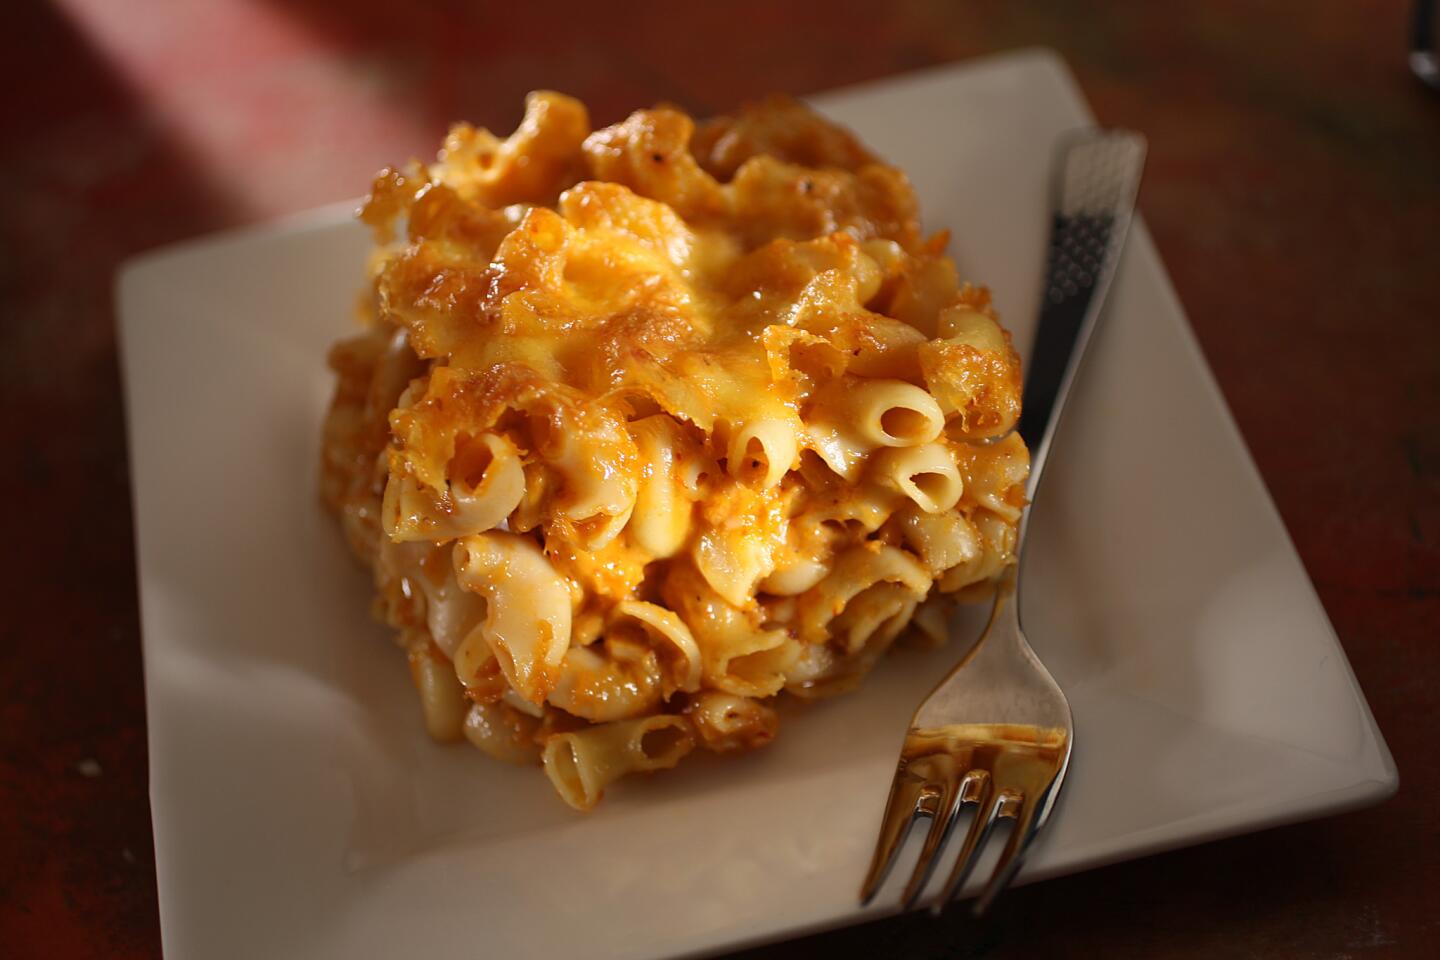 Spicy mac 'n' cheese as an appetizer? Oh, yes.